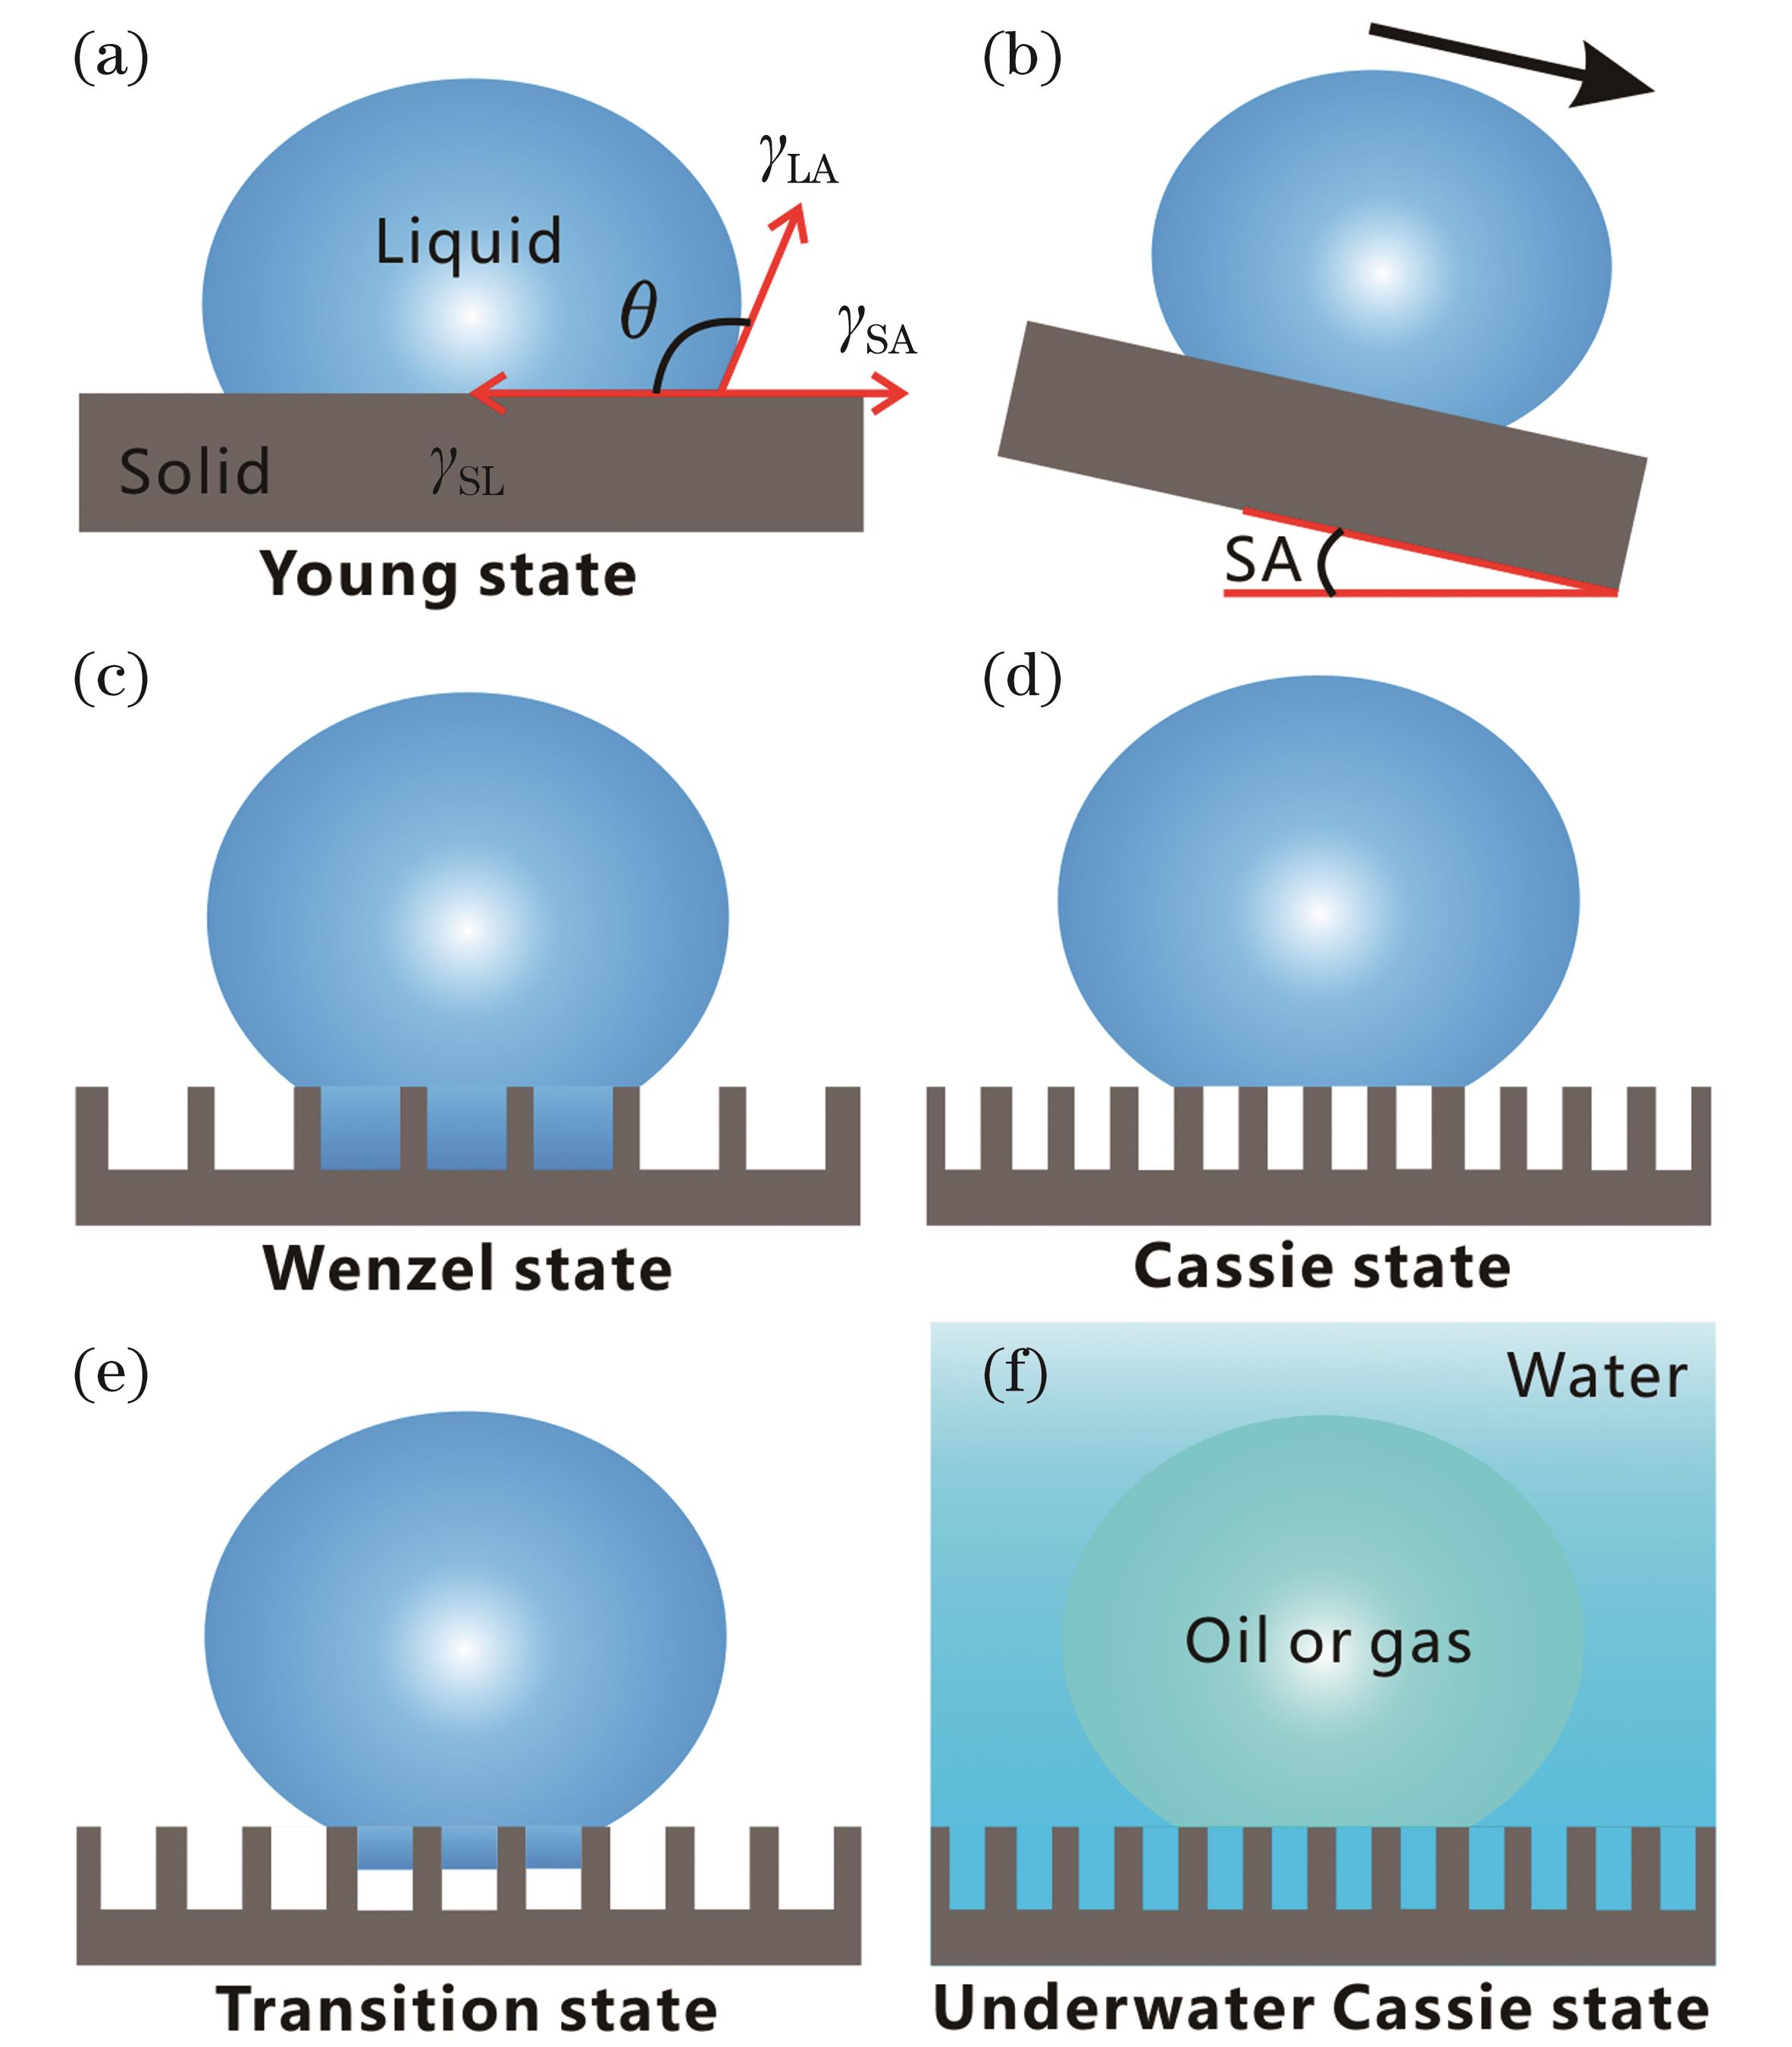 Basic concepts related to surface wettability and several typical wettability models. (a) Droplet on smooth surface and contact angle (θ); (b) Sliding angle (SA); (c)-(e) Droplet contact on rough microstructure: Wenzel contact state (c), Cassie contact state (d), and Wenzel-Cassie transition contact state (e); (f) Underwater Cassie contact state